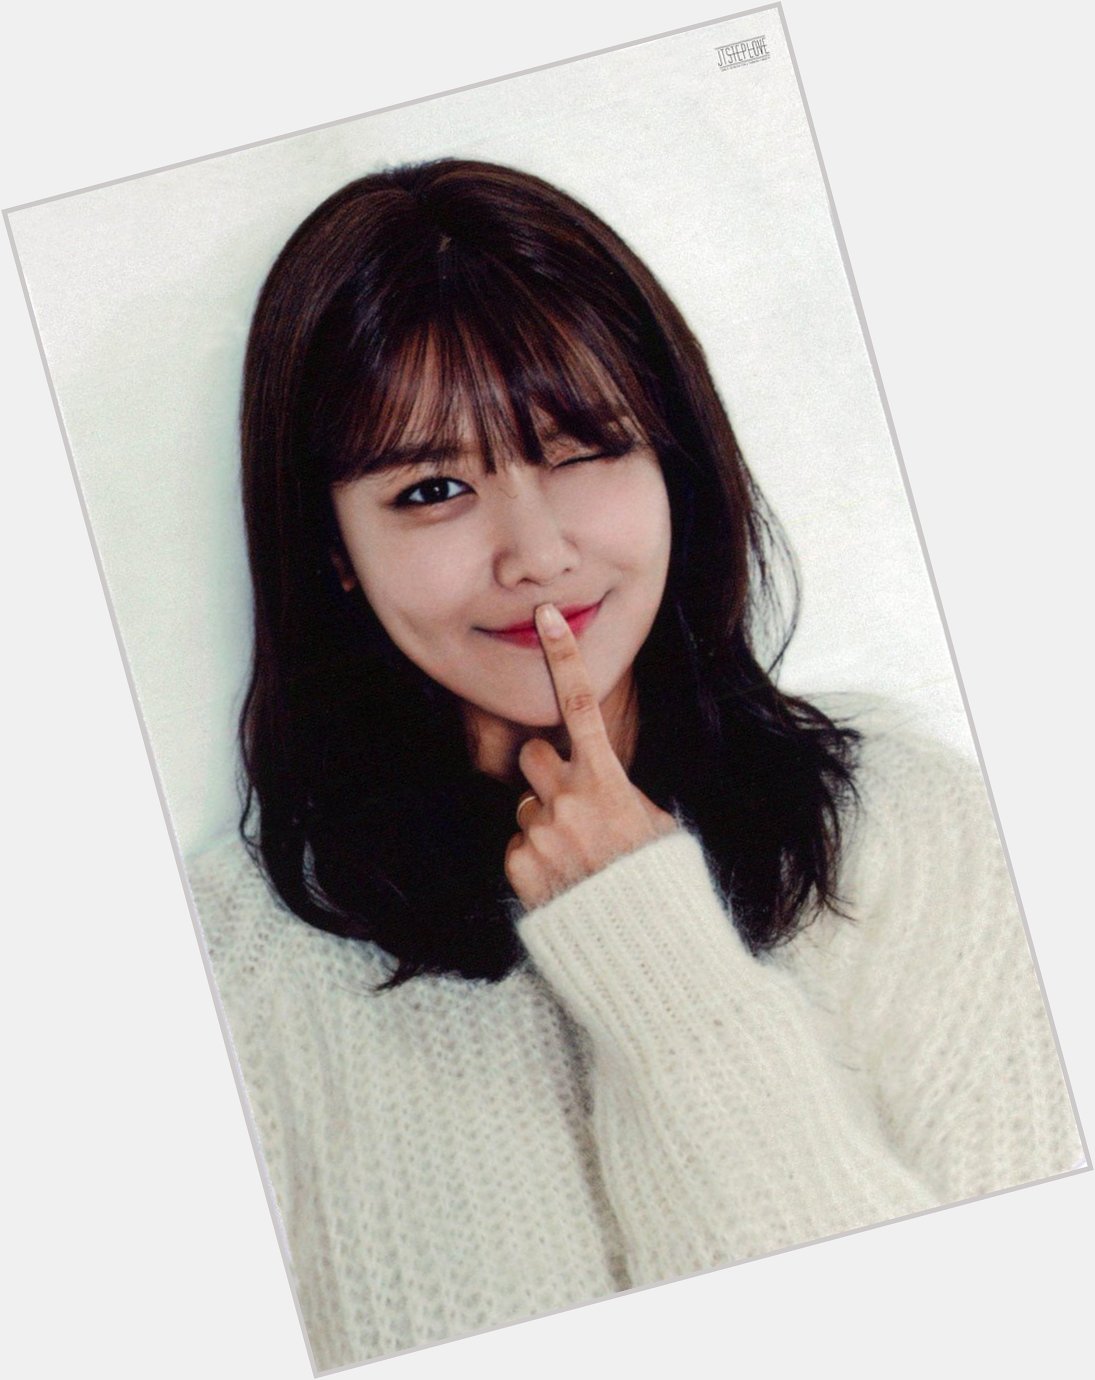 Choi sooyoung happy birthday my same age lady lmao i hope for you to always just be happy    